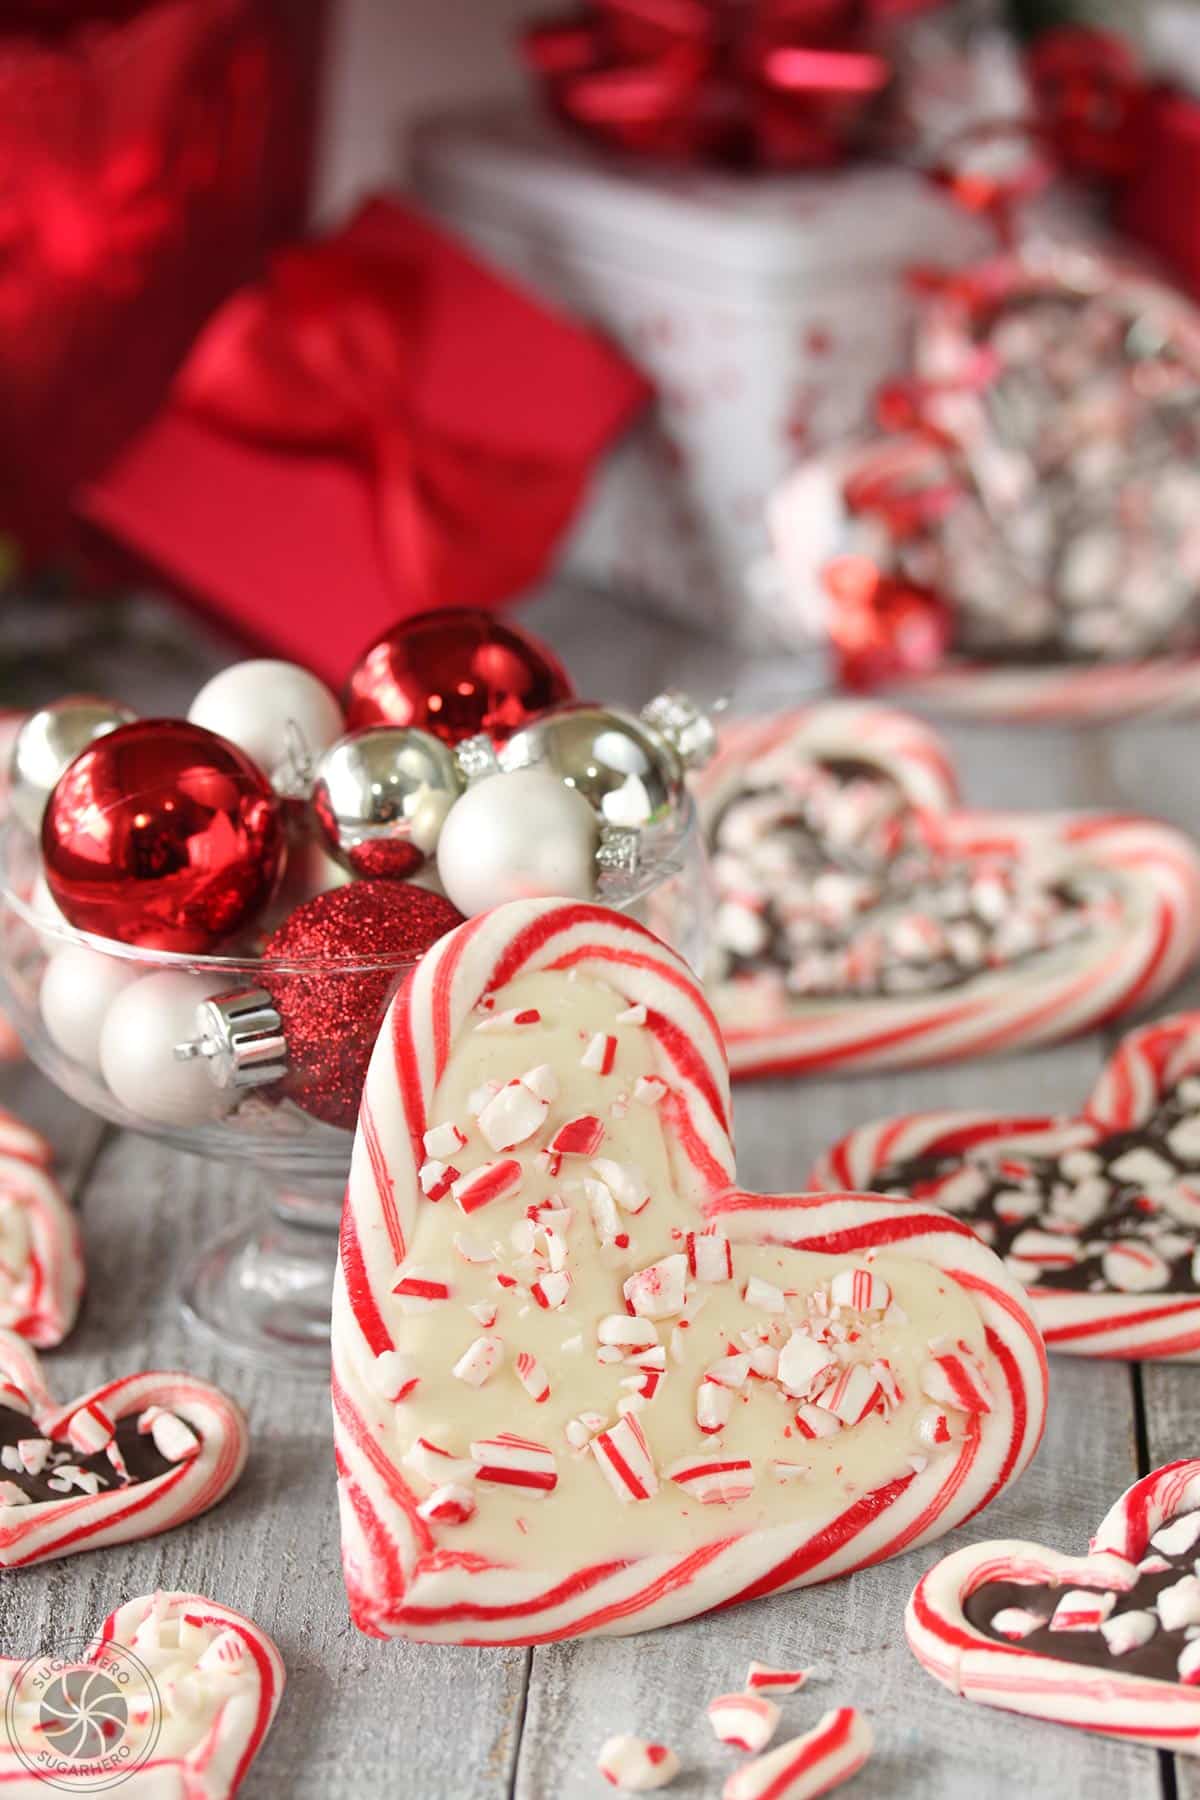 Close-up of a Candy Cane Heart with white chocolate on the inside, leaning against a glass bowl filled with shiny ornaments.